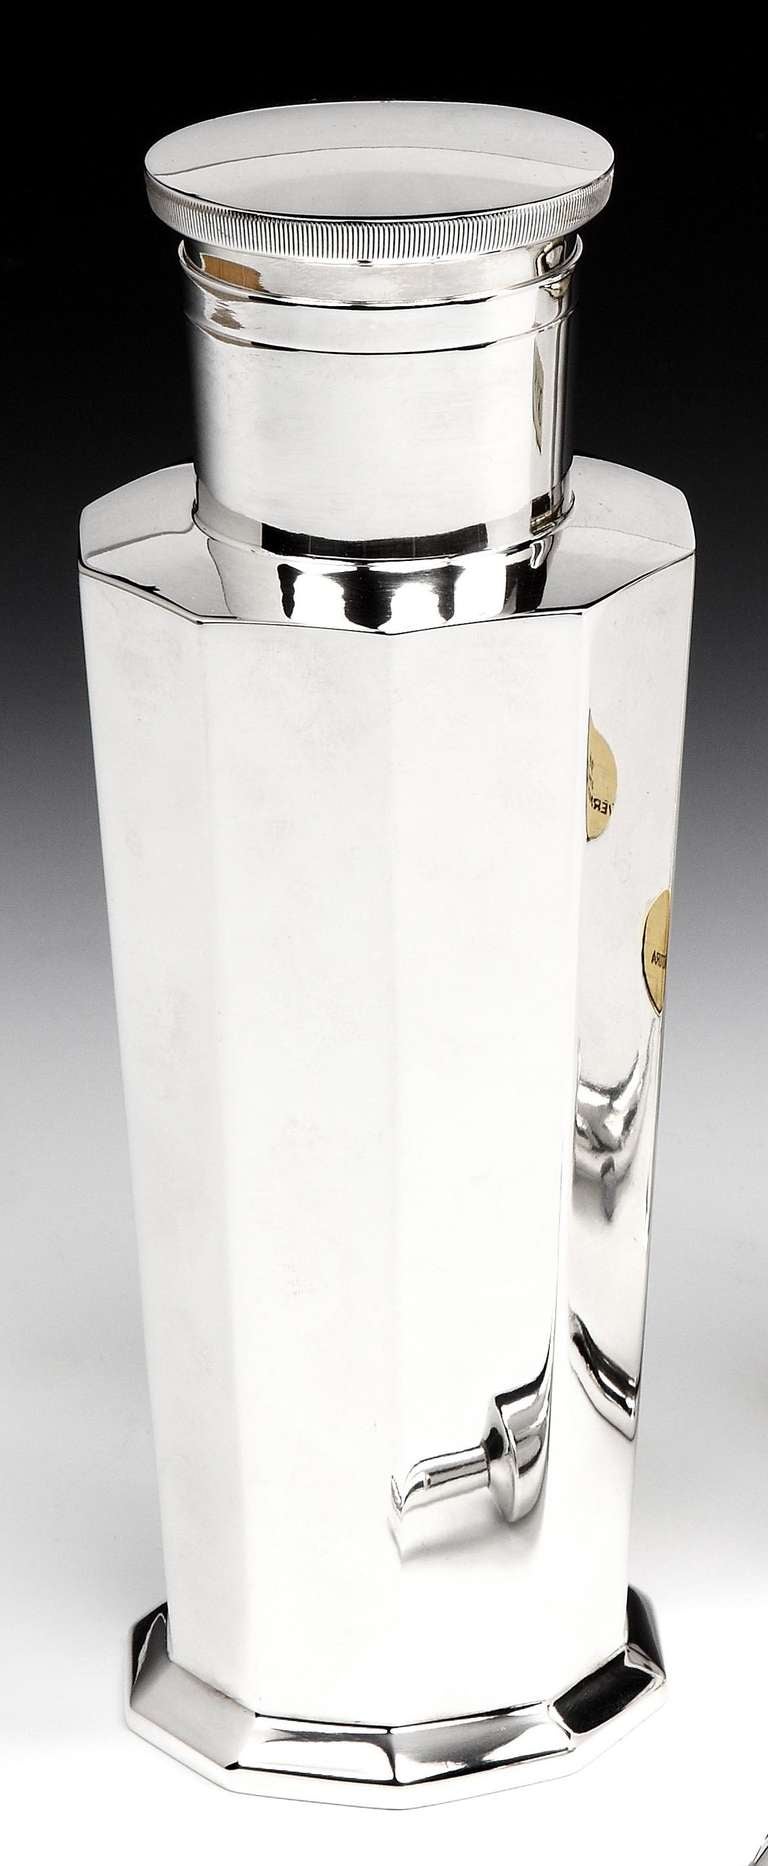 An incredibly stylish Art Deco silver plated cocktail shaker, designed by Keith Murray for Mappin & Webb, in the Modernist style with a knurled cap serving as a double measure or jigger, and removable strainer. Marked to the base 'Mappin & Webb,